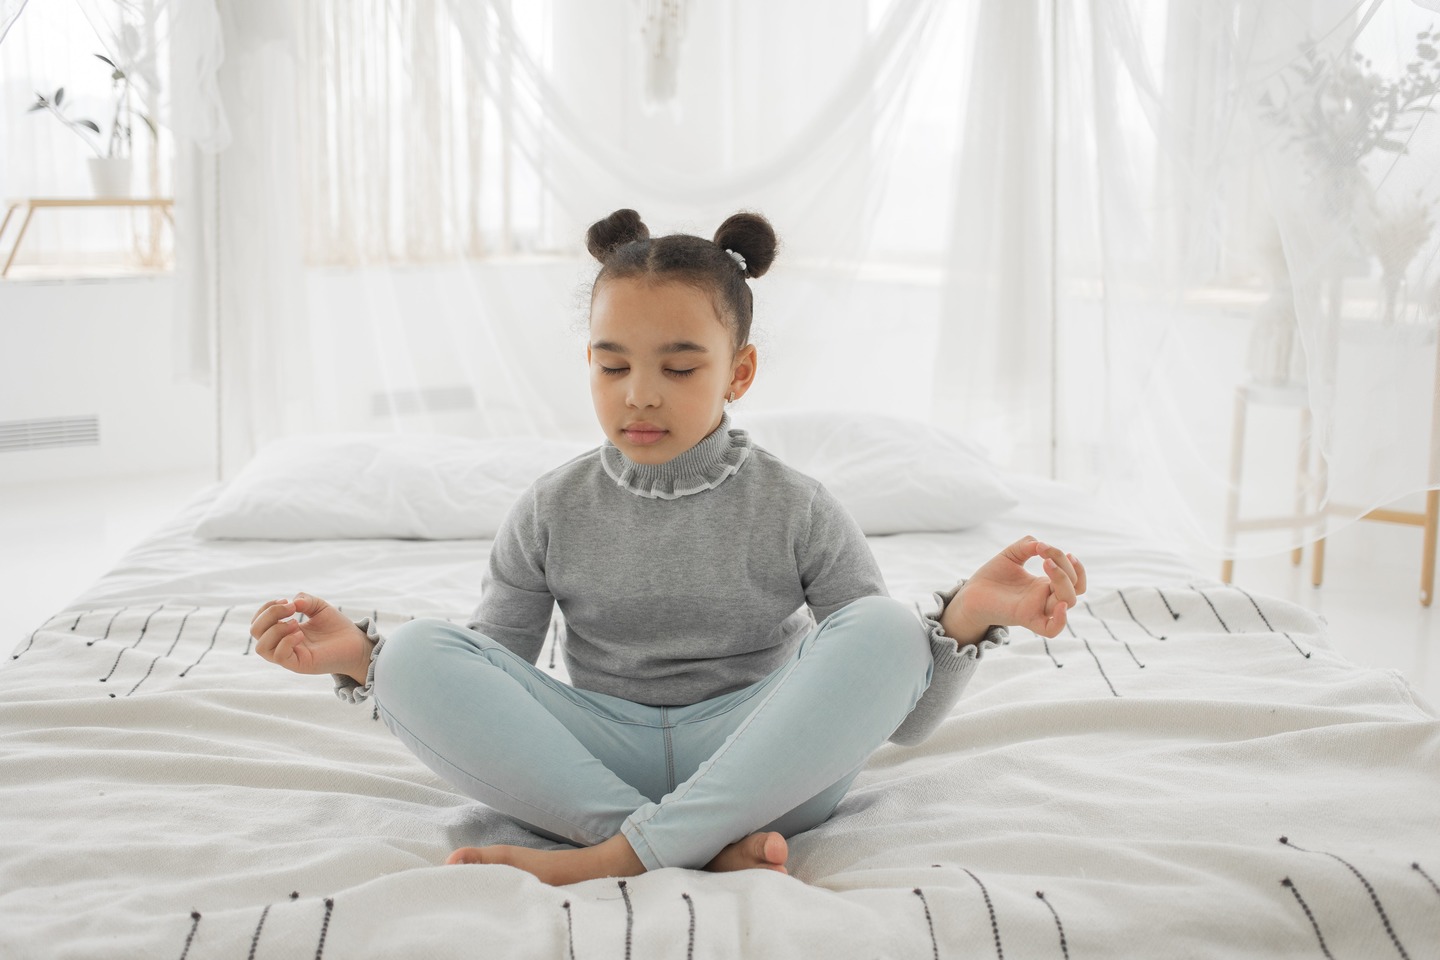 Highly sensitive young girl sitting criss-cross on her bed practicing calming breathing techniques